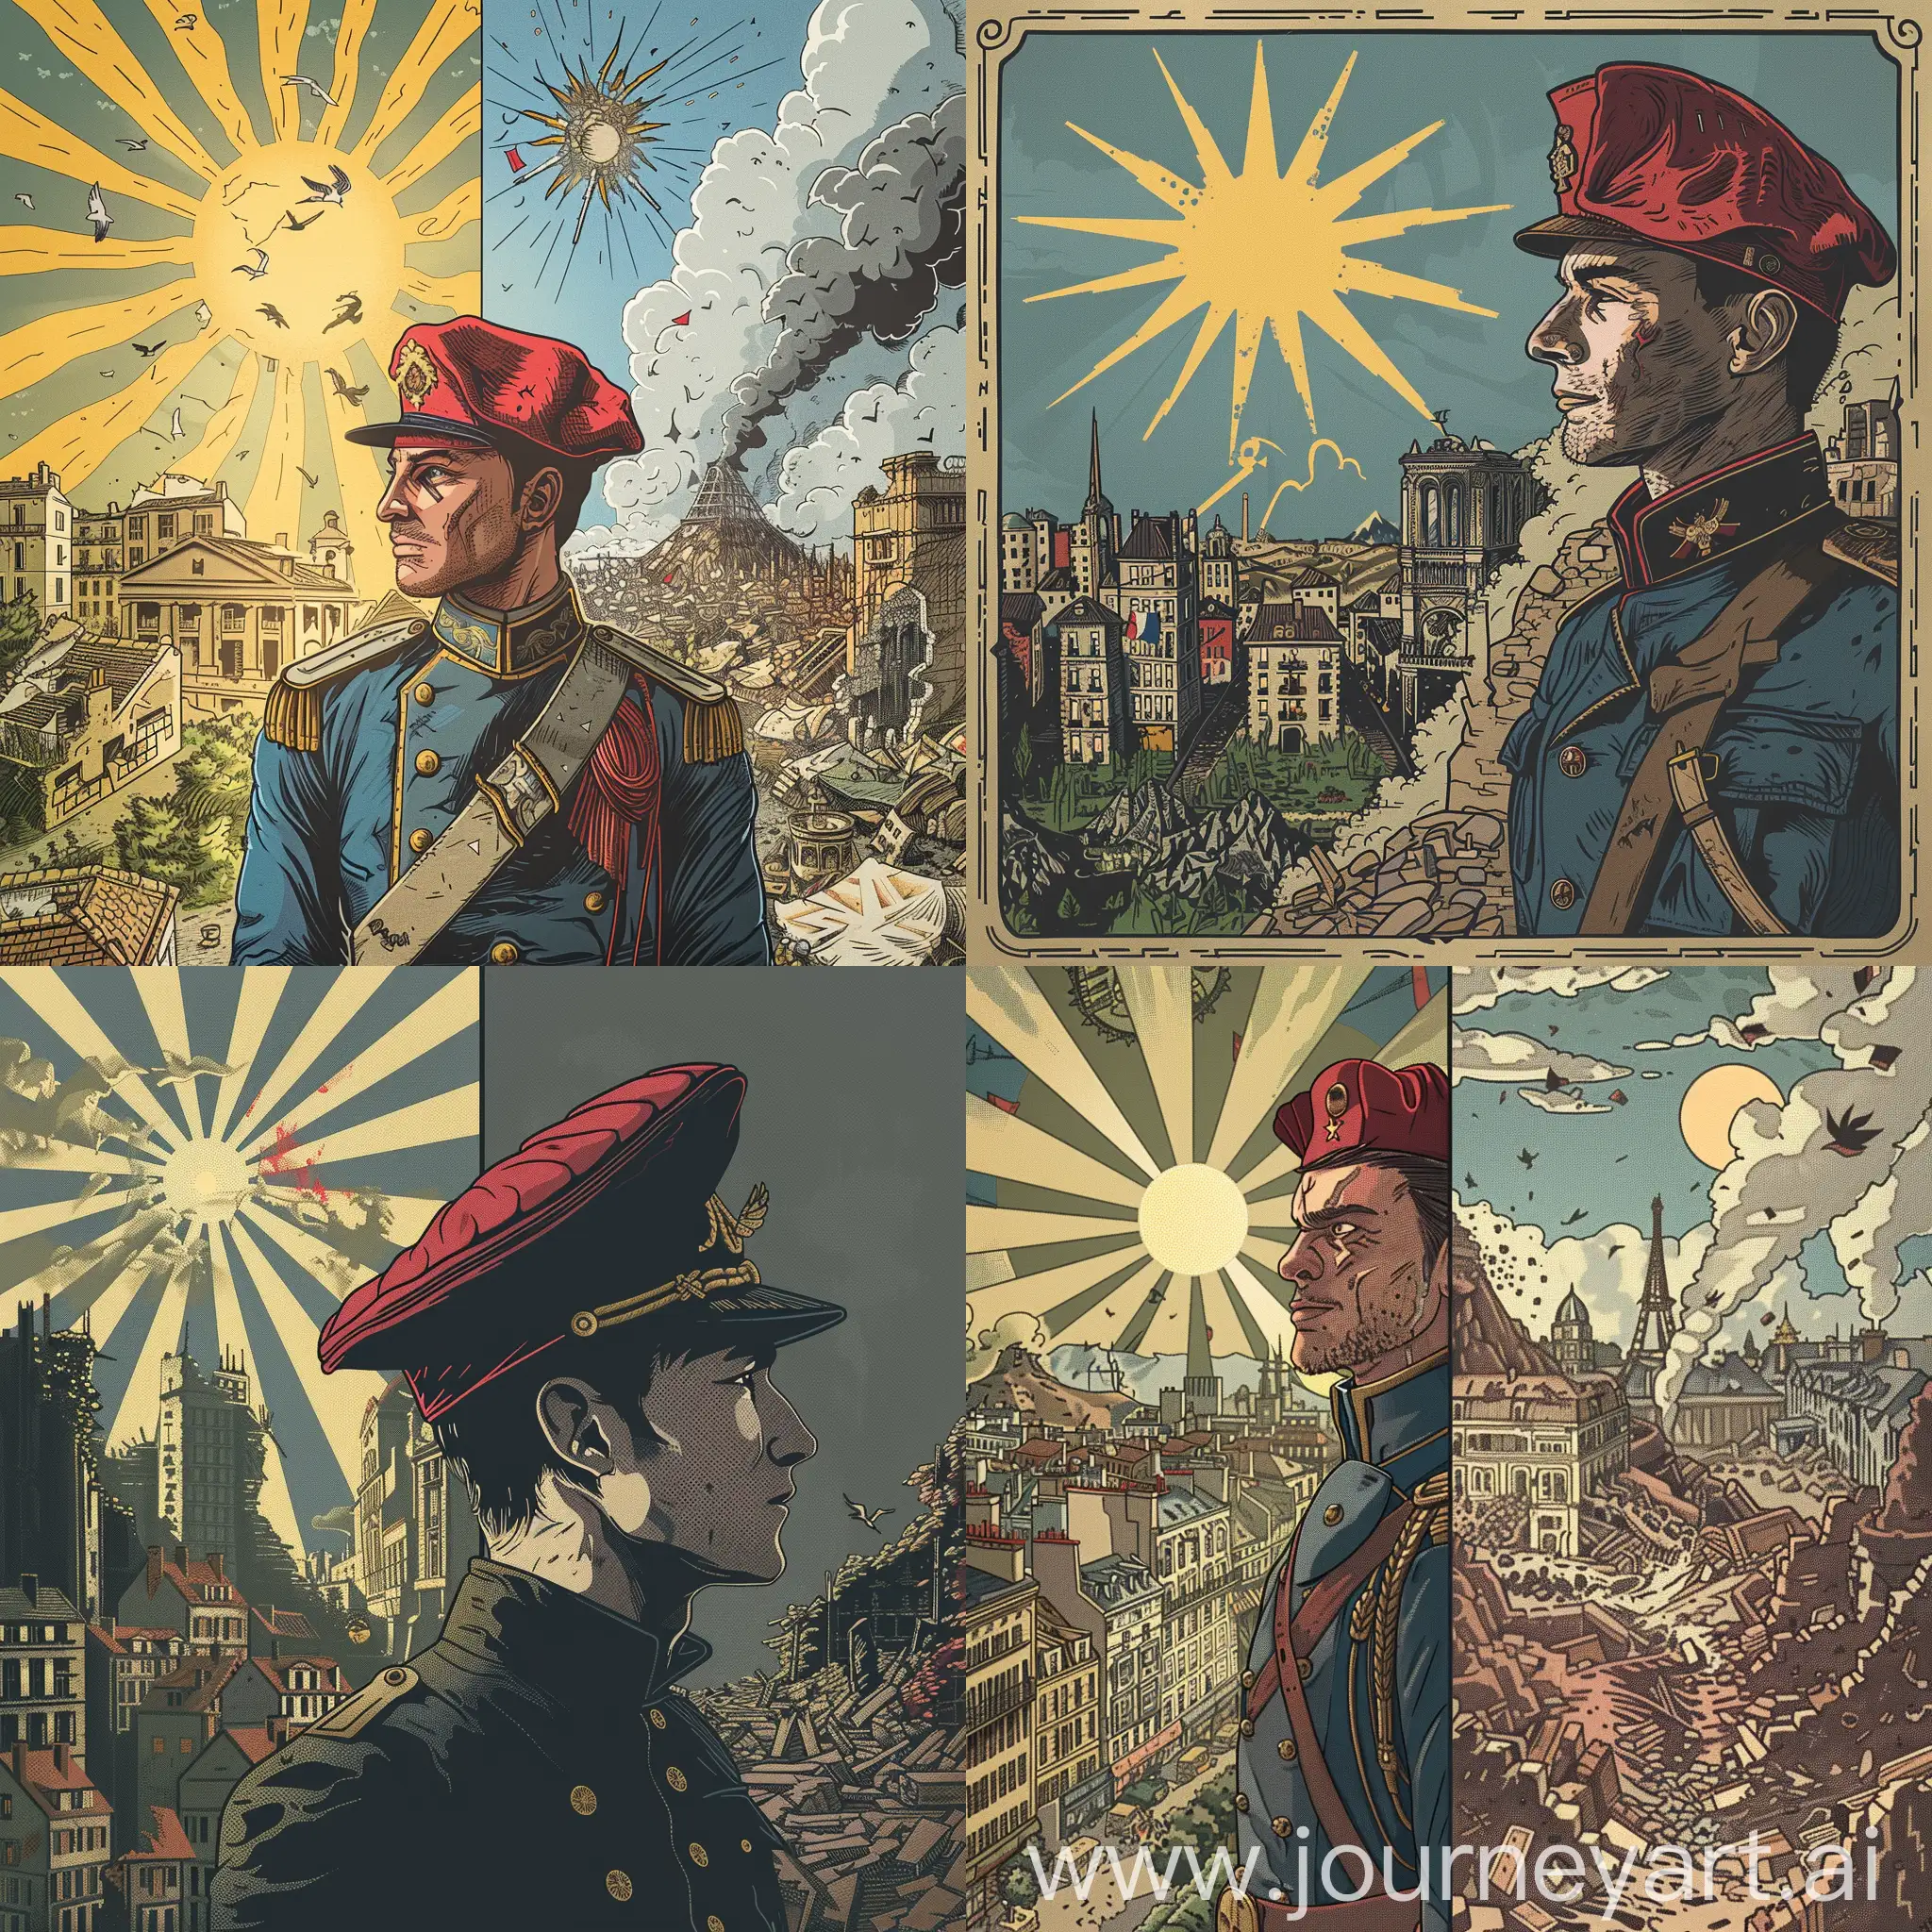 Revolutionary-French-Uniformed-Man-Amidst-Contrasting-Cities-in-1939-Style